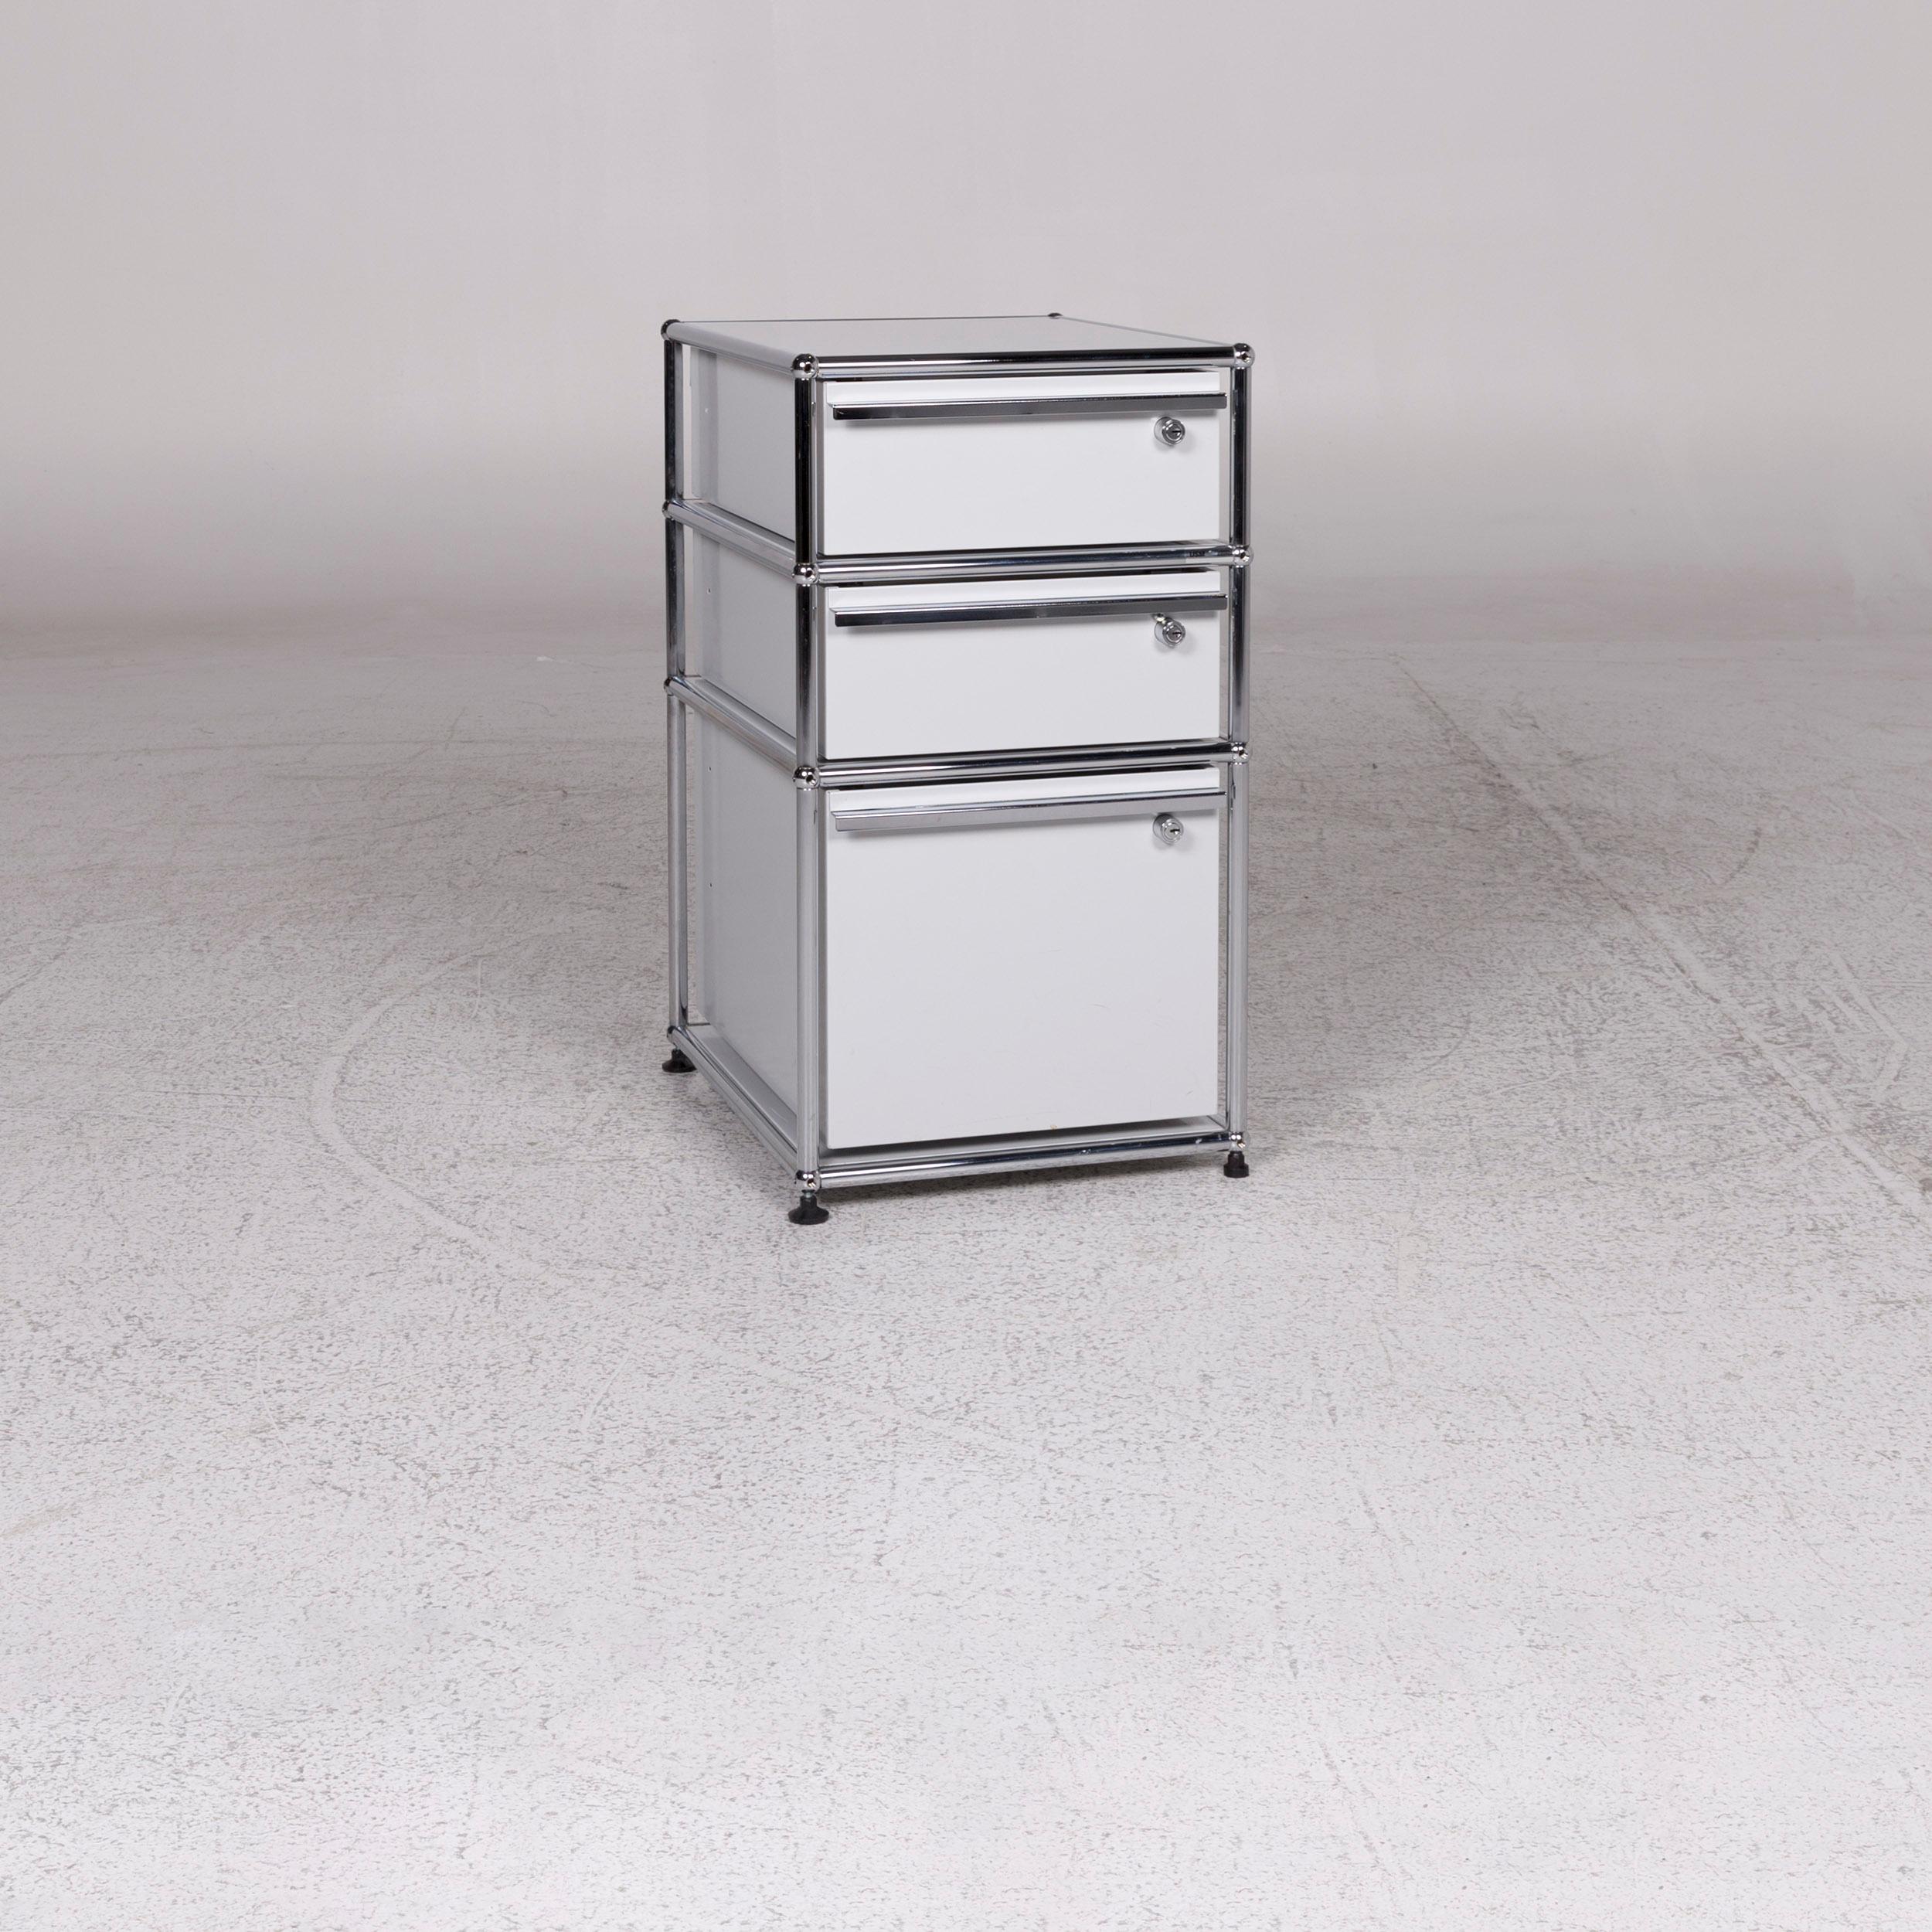 We bring to you an Usm Haller metal sideboard set light gray with three drawers chrome.
   
 
 Product measurements in centimeters:
 
 Depth 54
Width 43
Height 74.




   